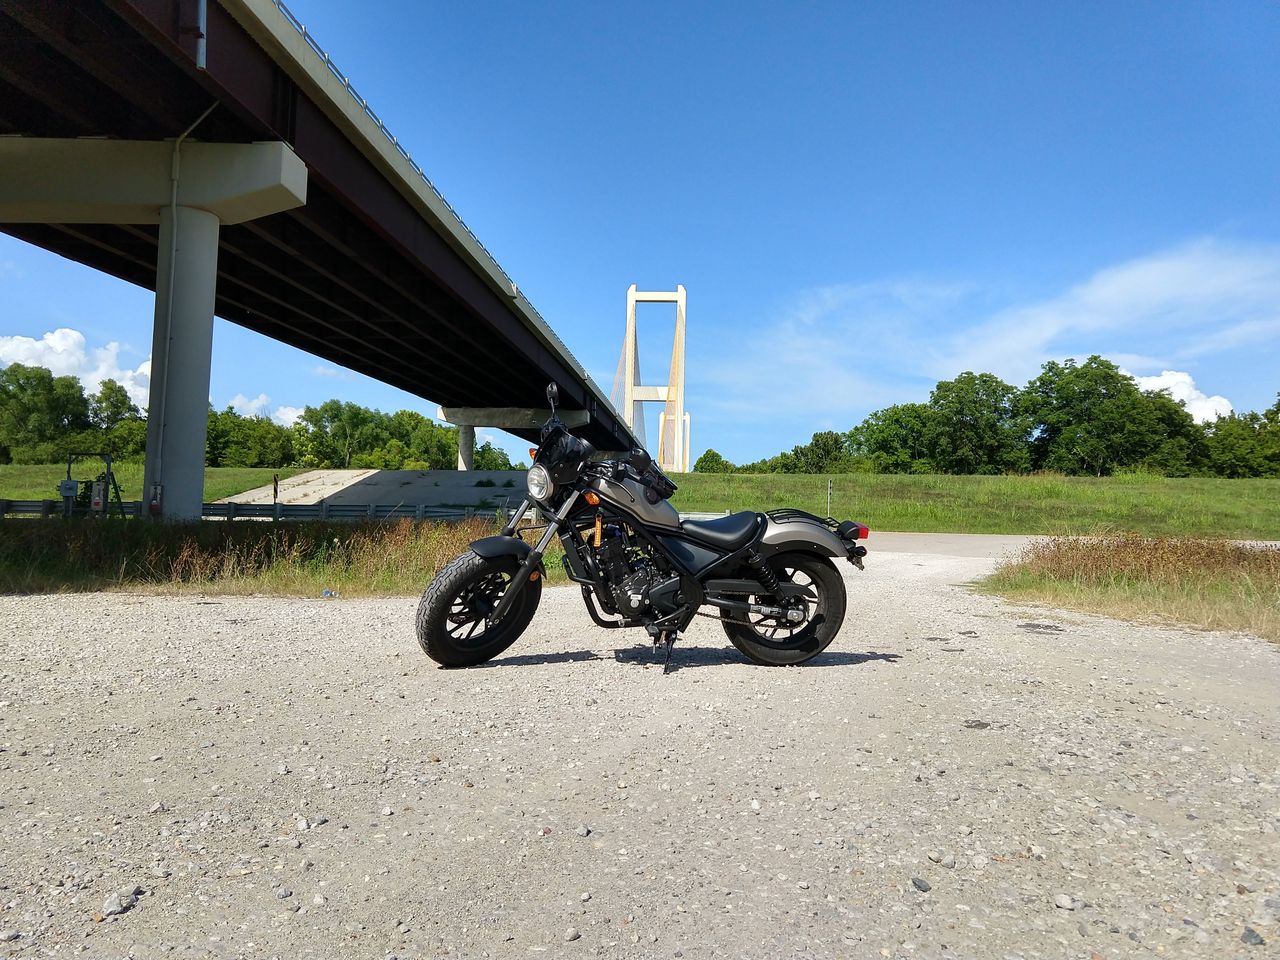 My Rebel 300 with The Audubon Bridge in the background.